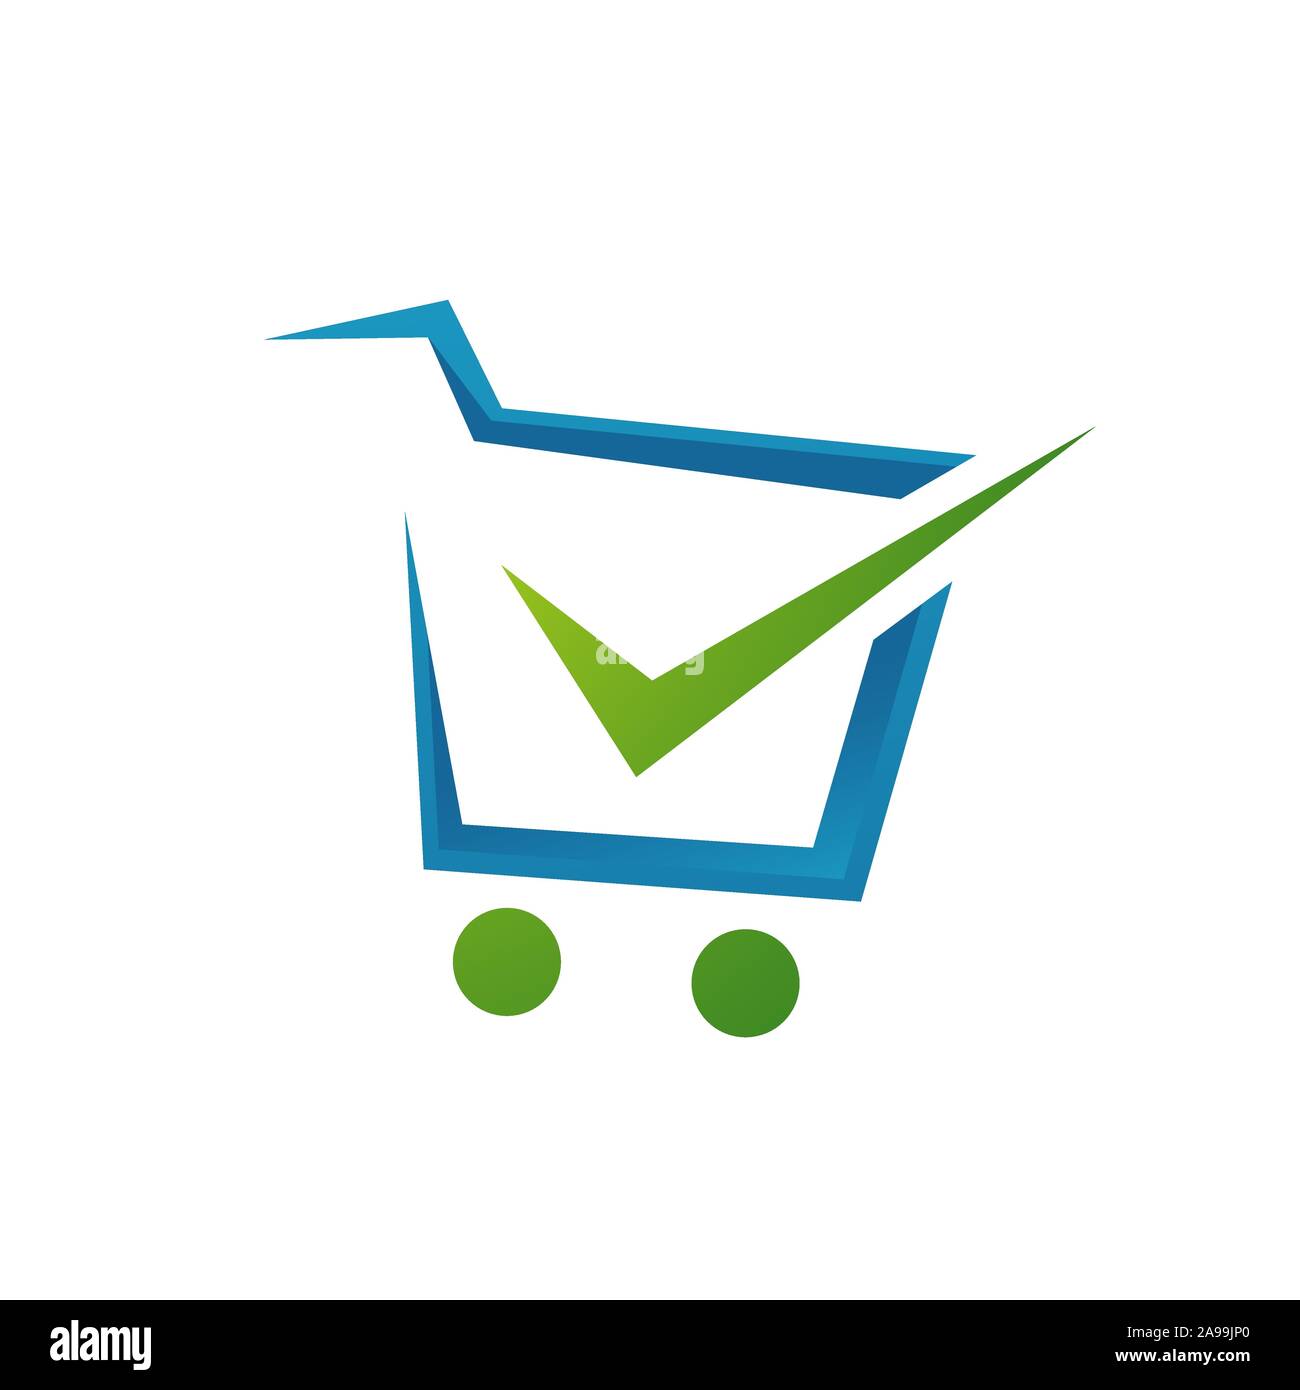 check mark and trolley for shopping cart logo icon  design shop symbol vector illustrations Stock Vector